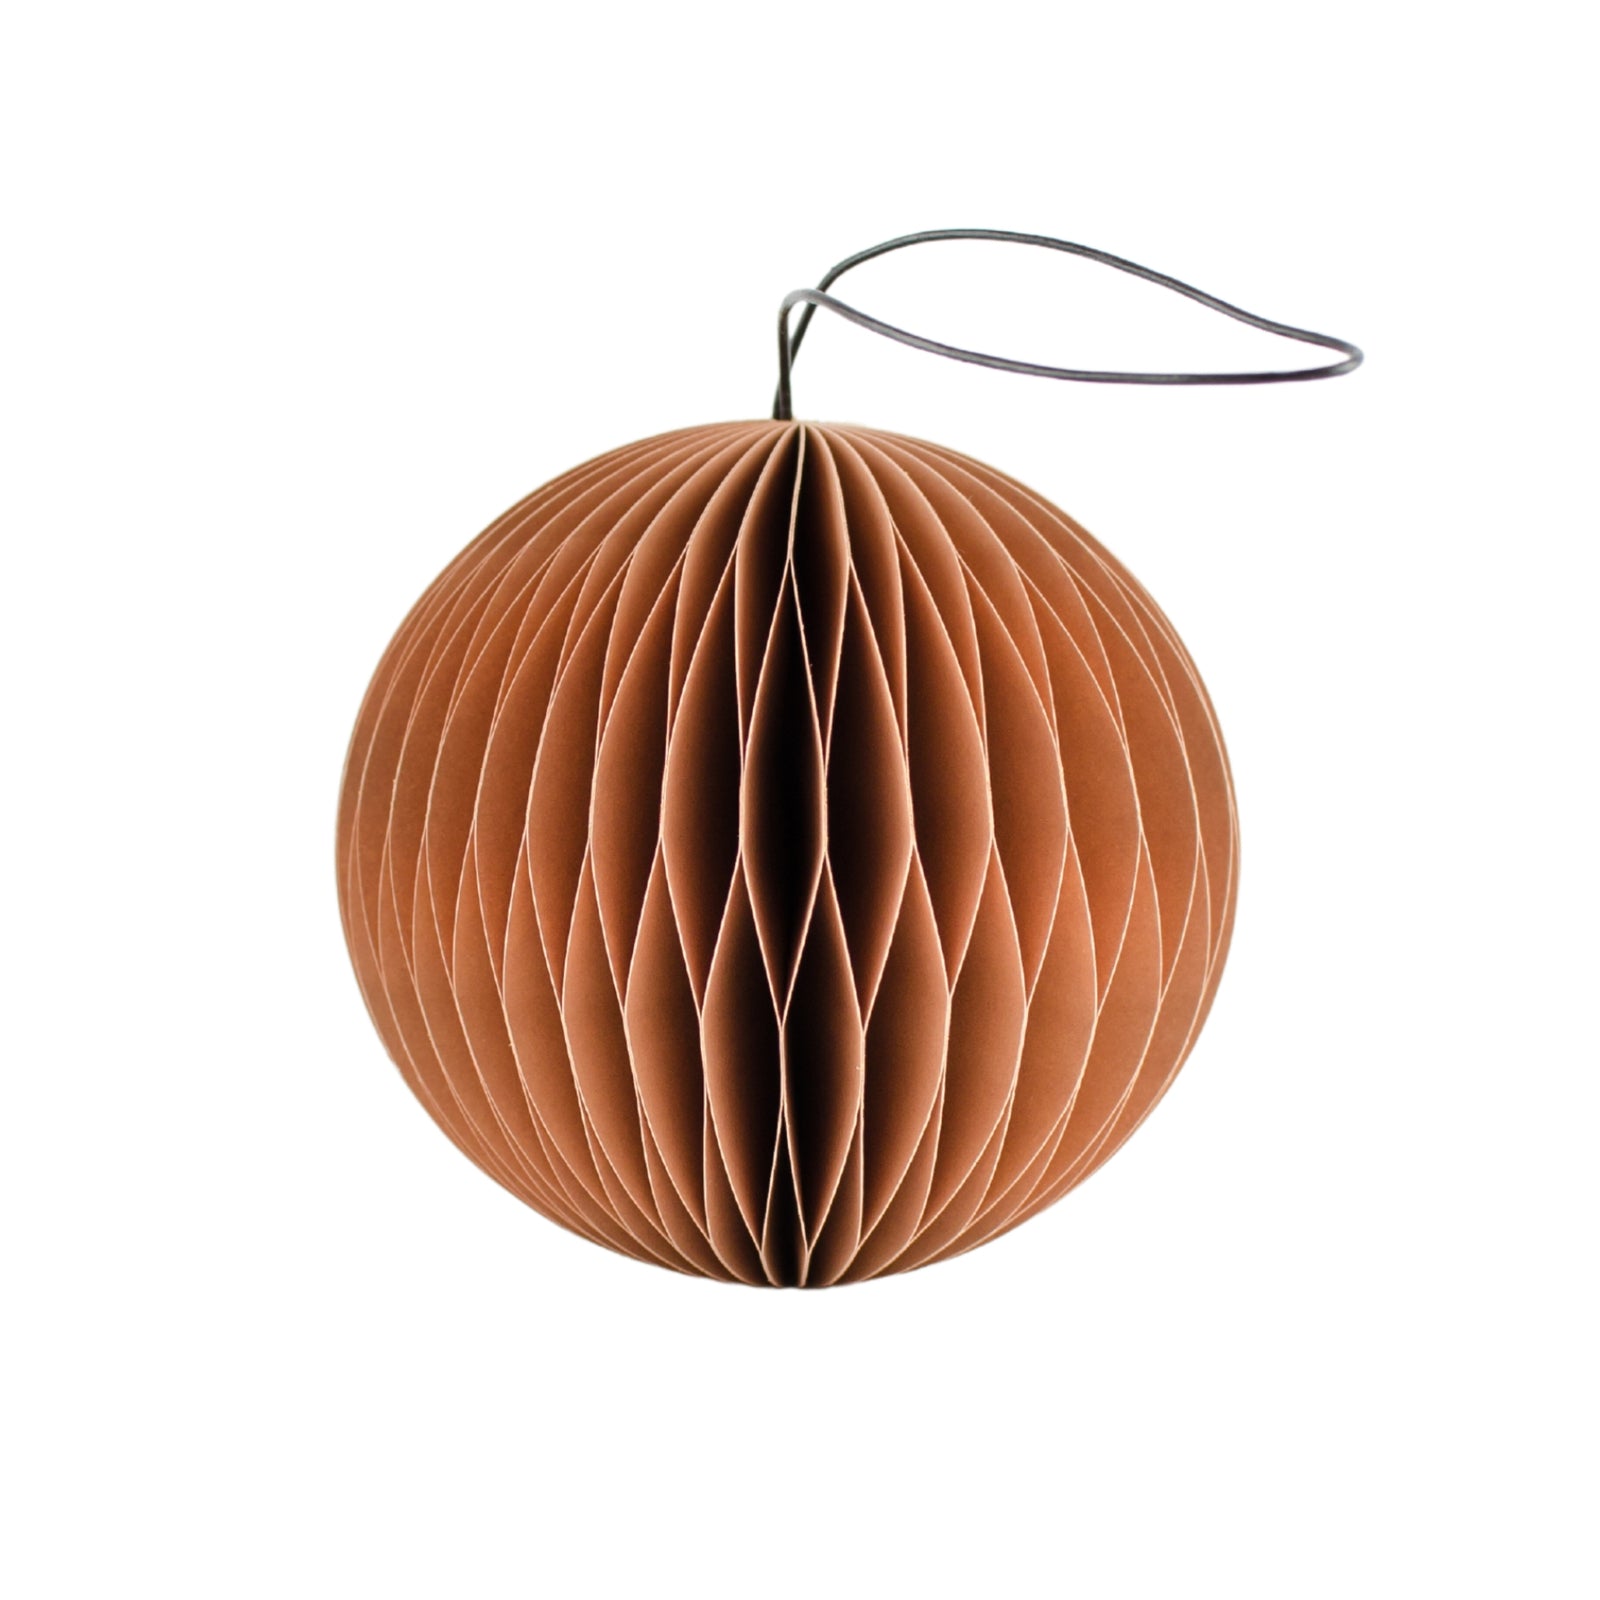 Clay Coloured Paper Christmas Ornament in the shapes of a sphere against a white background.